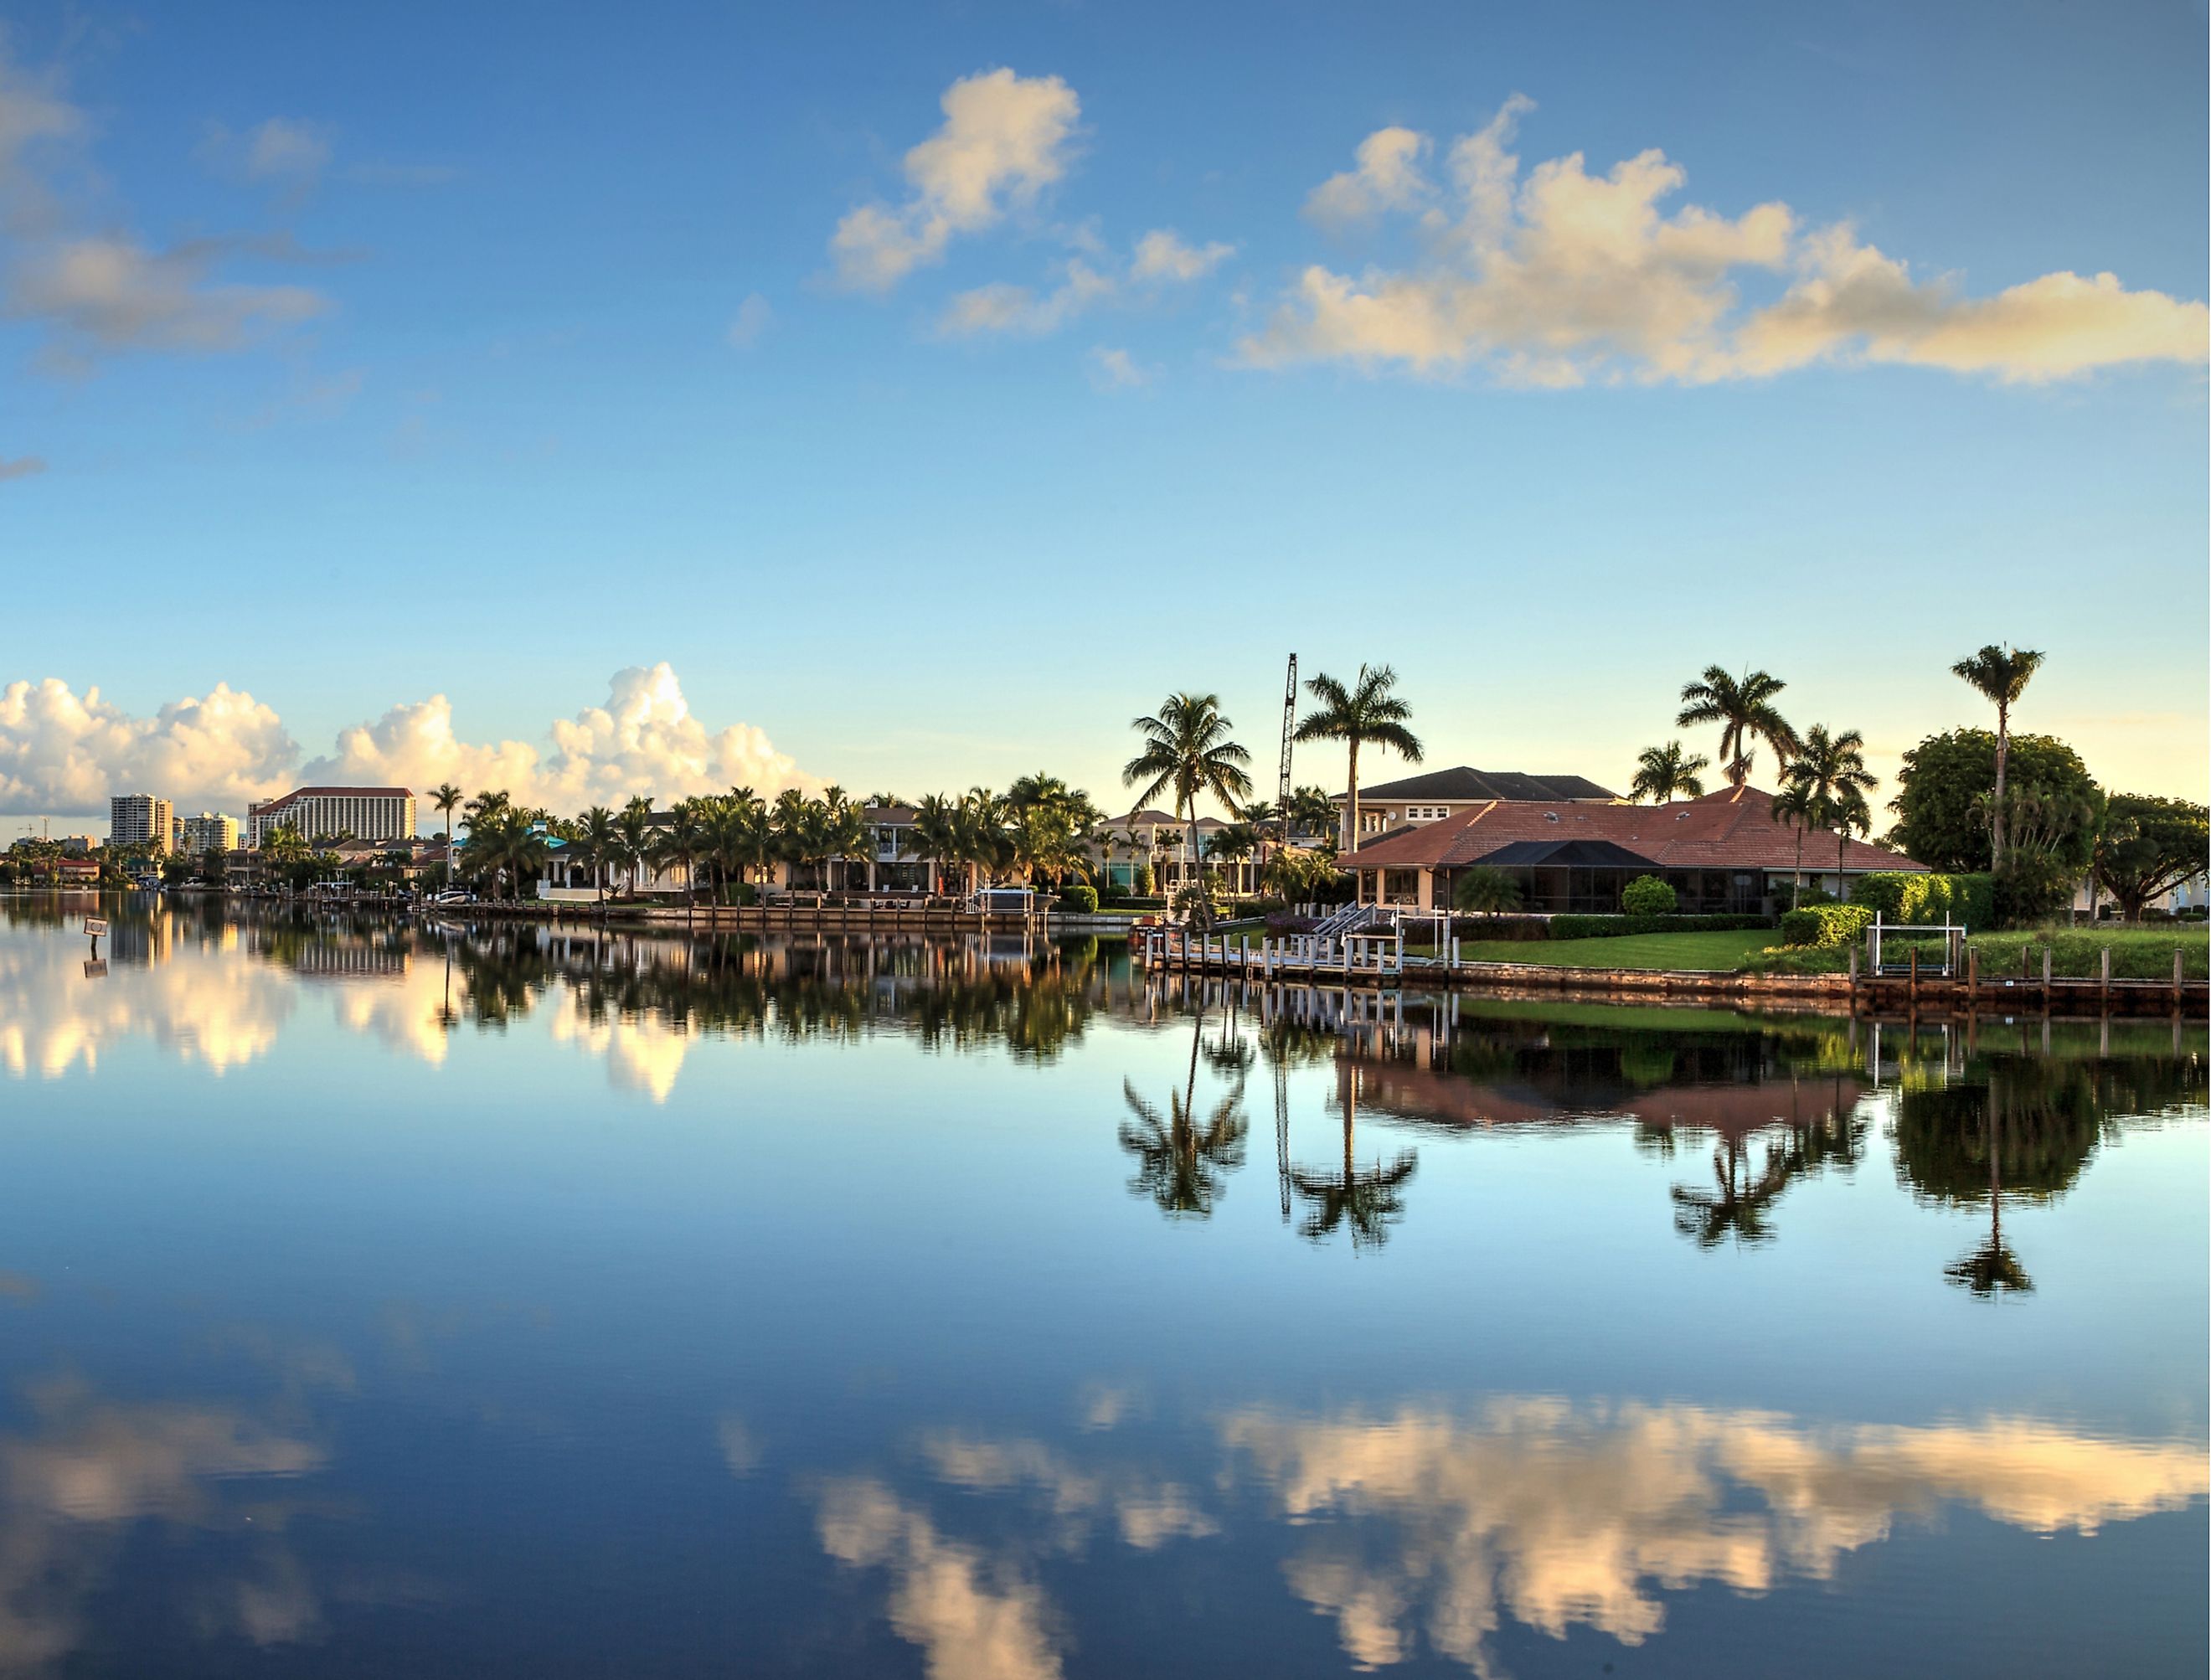 Reflection in the water of buildings along the Village at Venetian Bay in Naples, Florida.